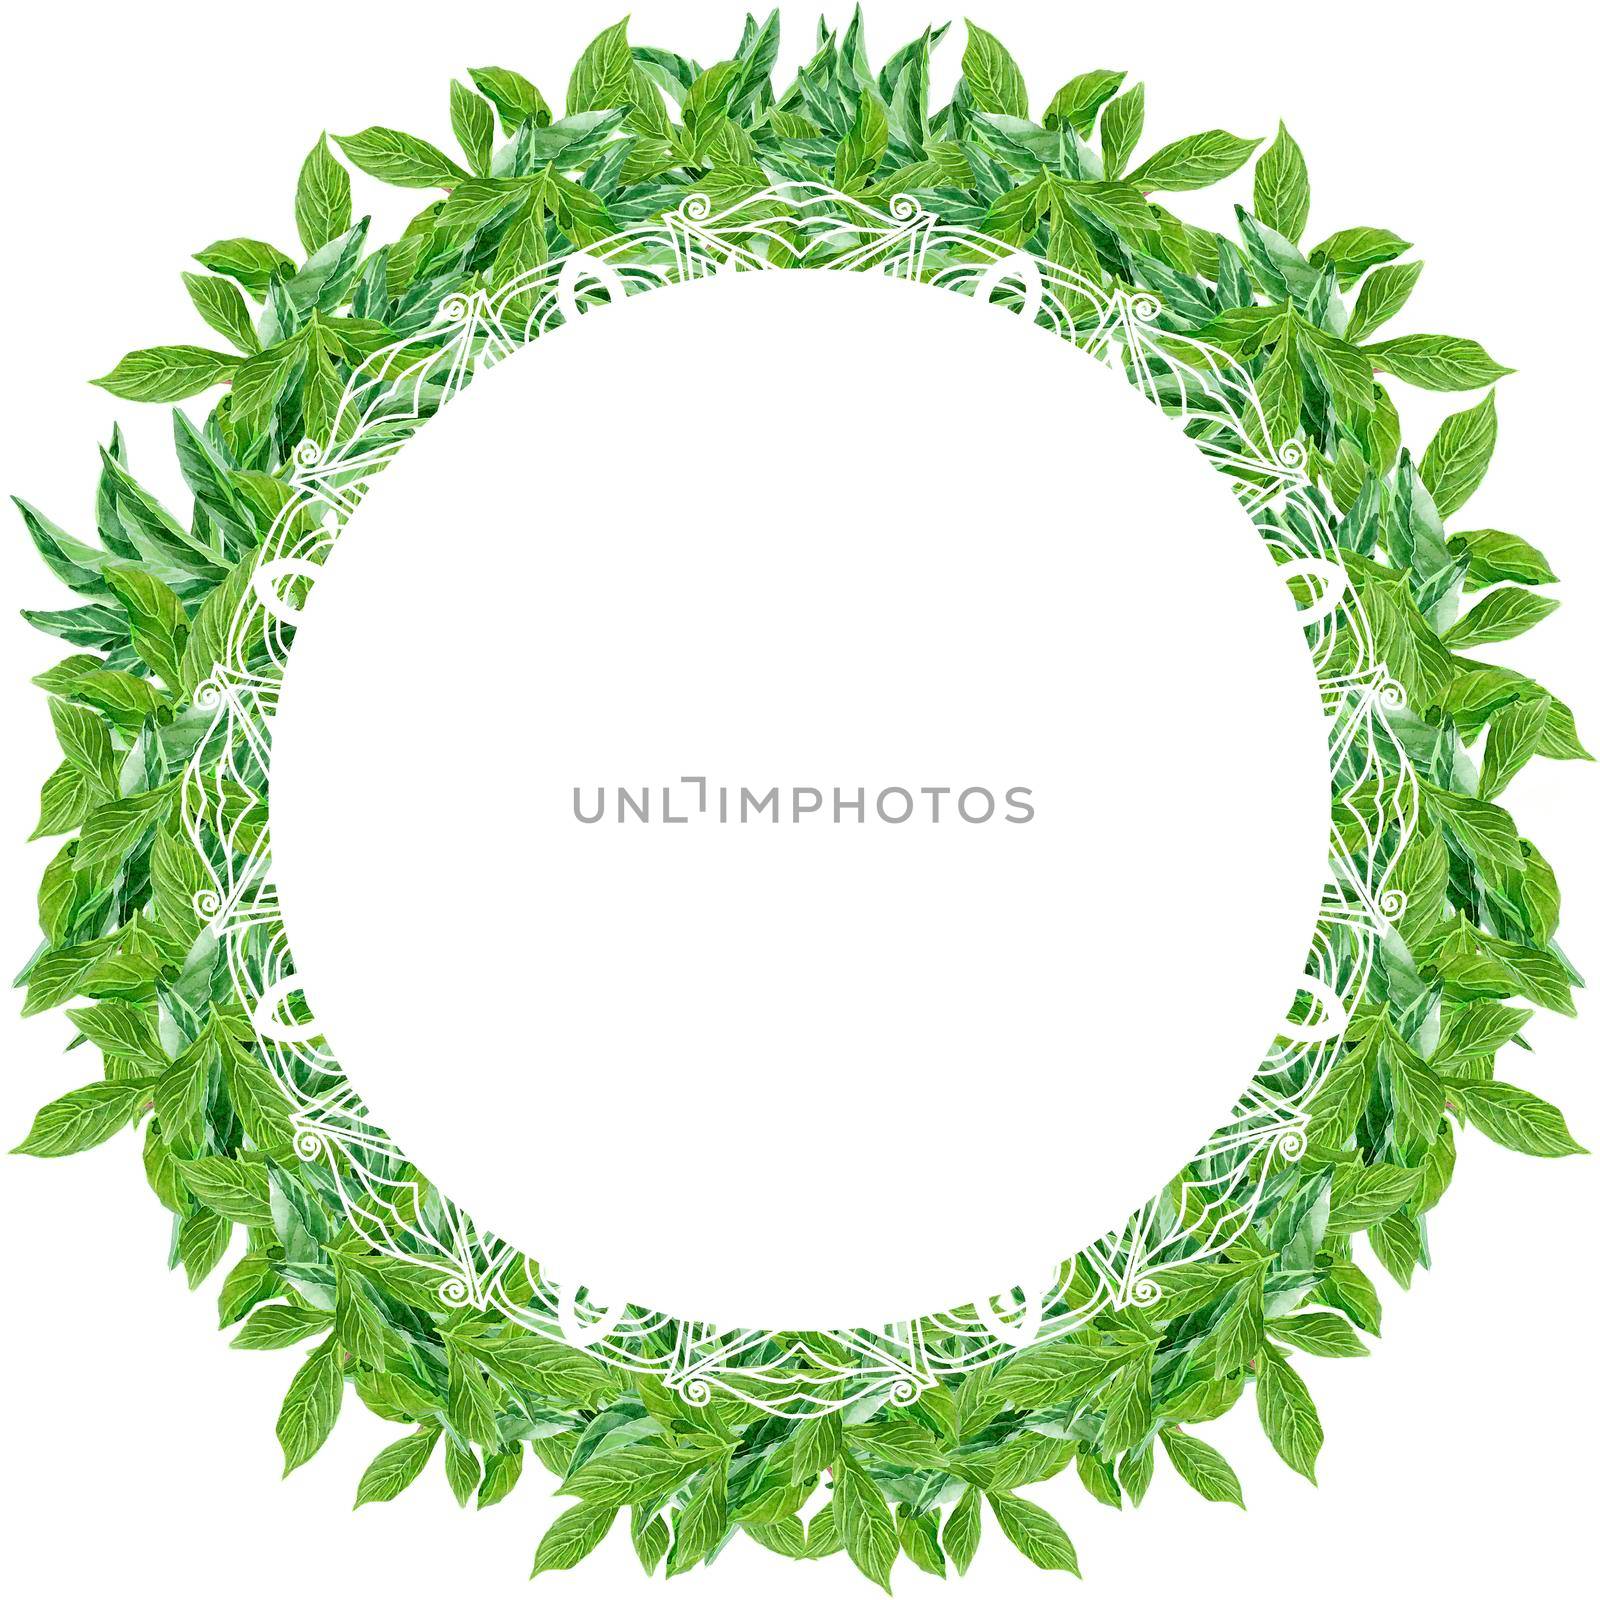 Lush luxury wreath of greenery with small leaves by NataOmsk